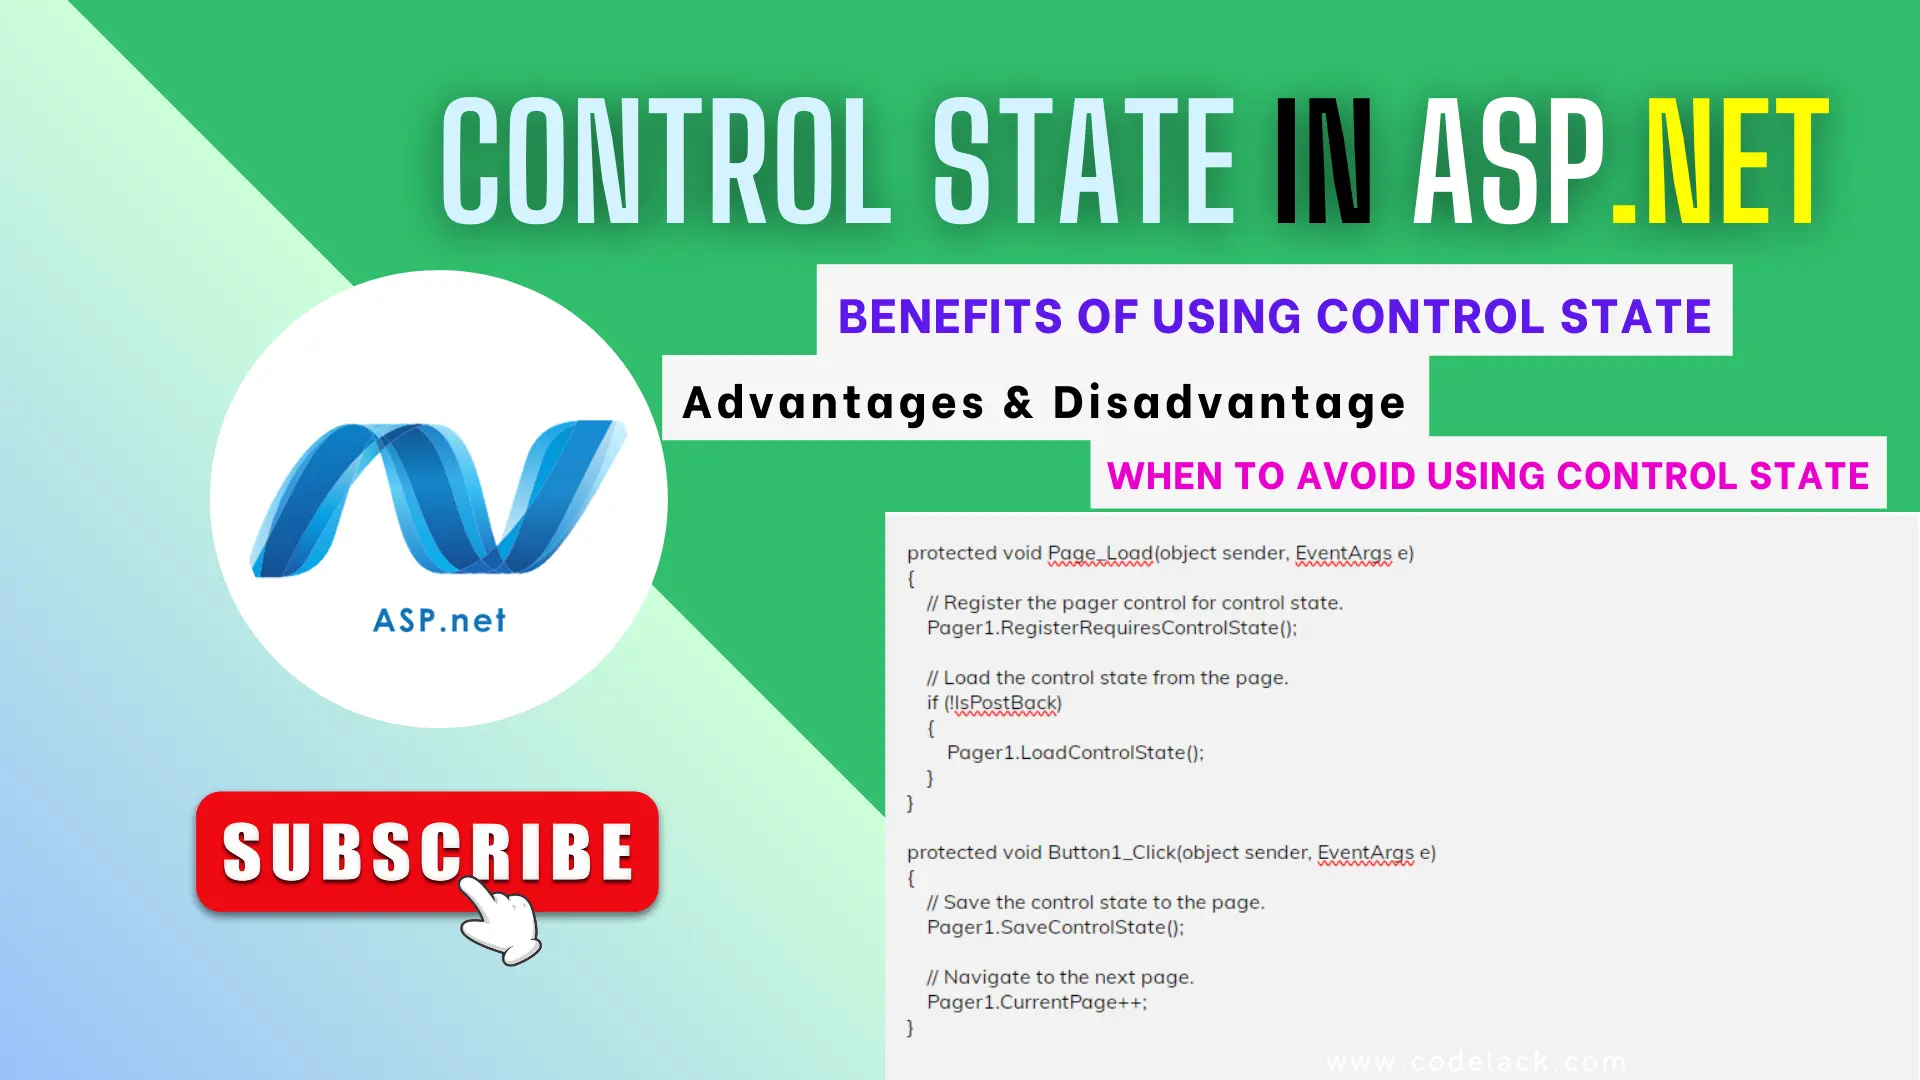 When to avoid using control state inasp.net